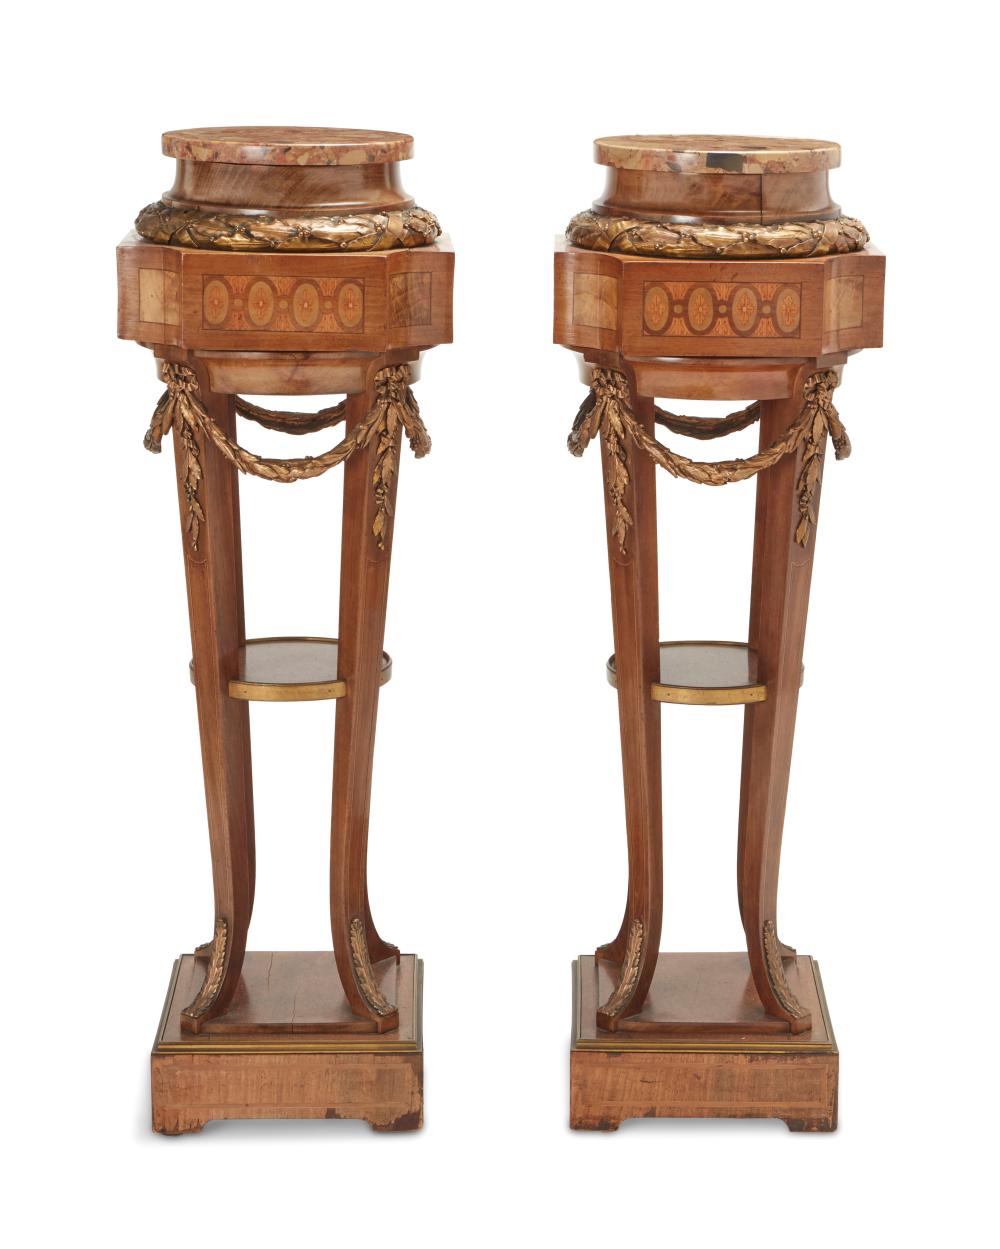 A PAIR OF FRENCH TORCHI RE STANDSA 2ee995